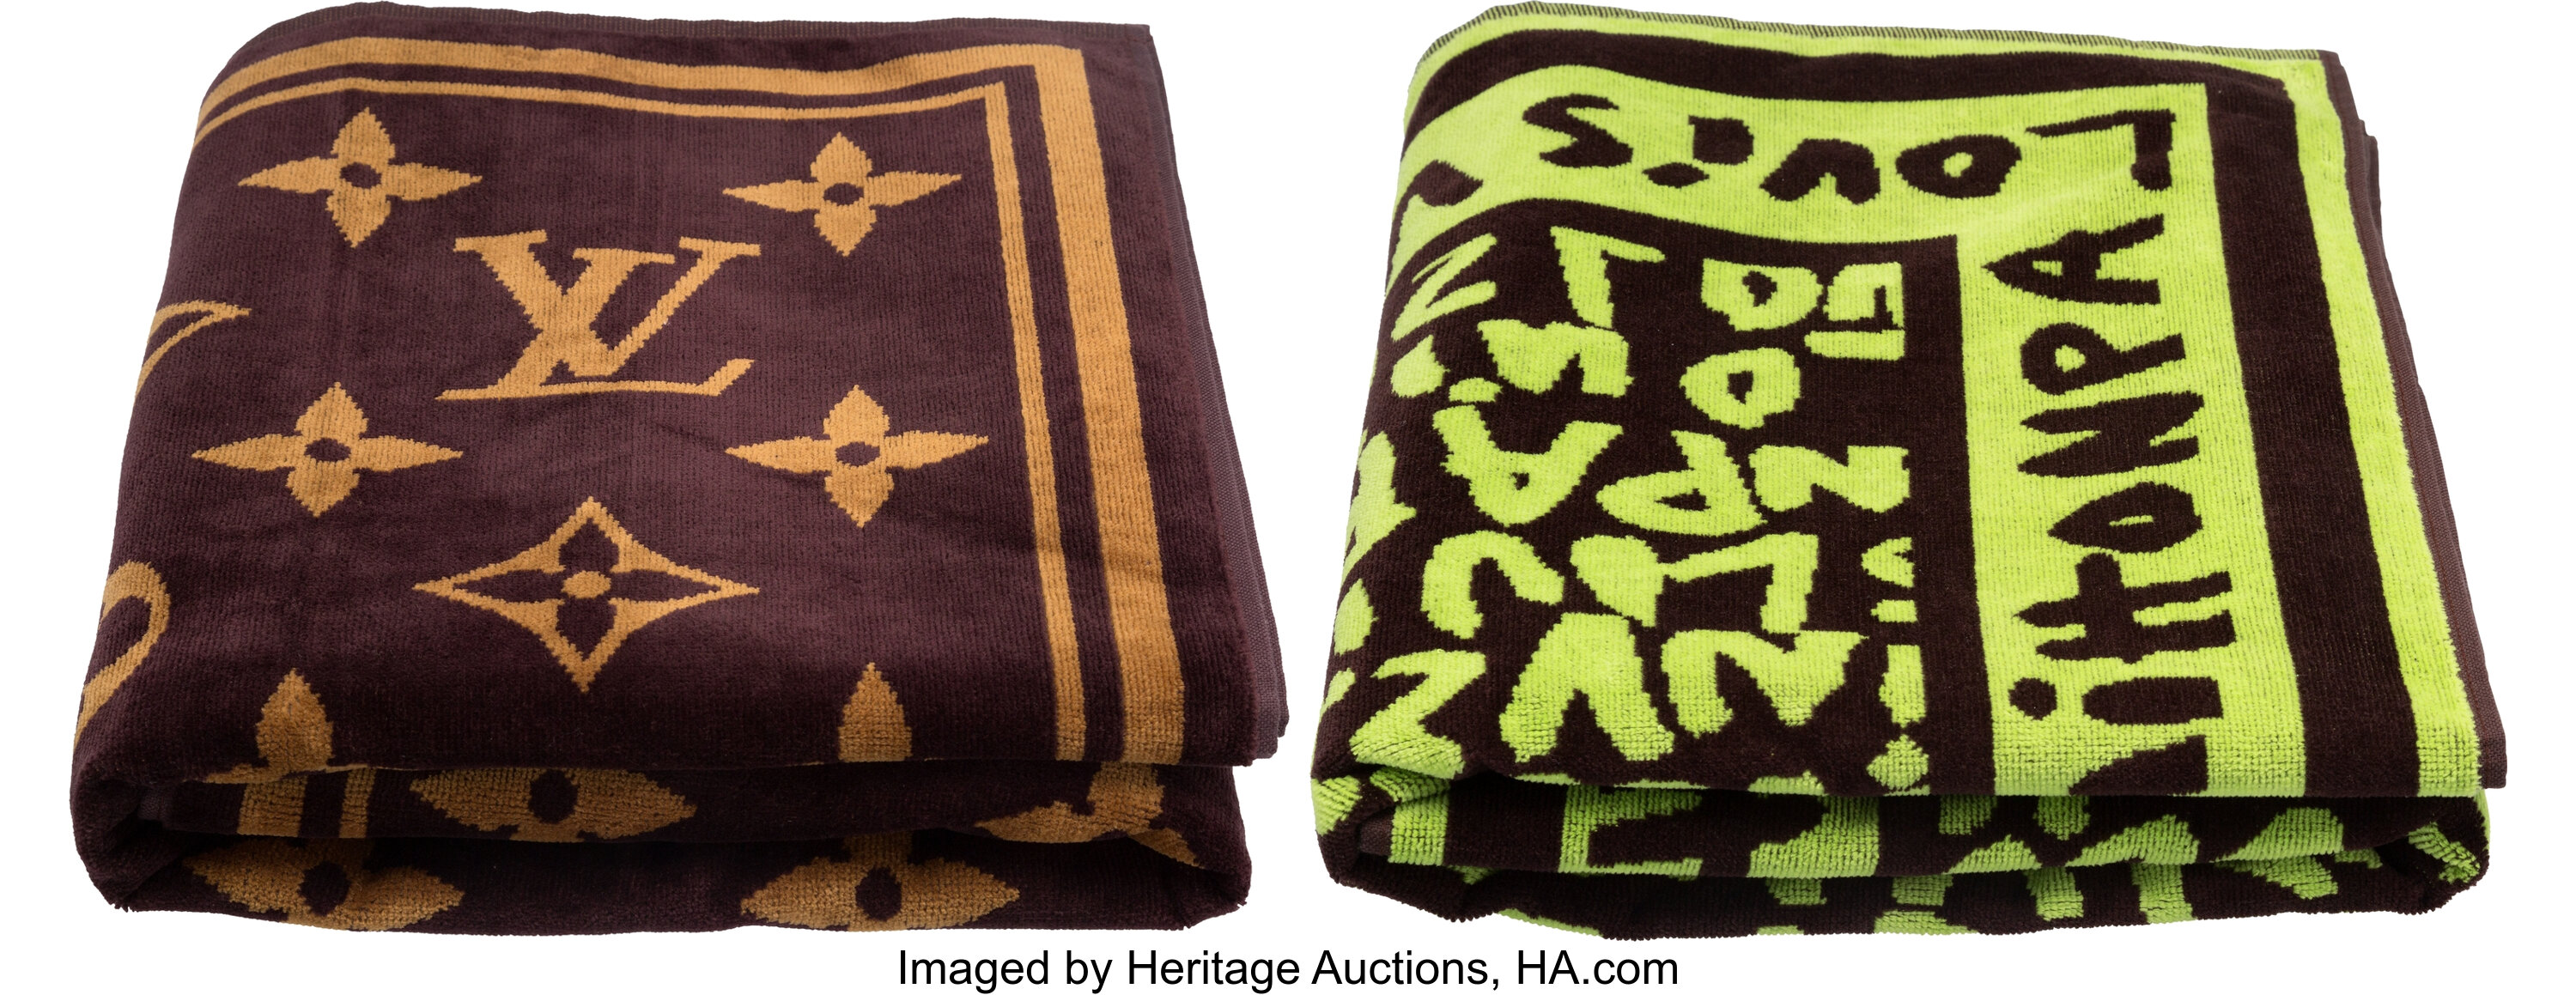 Louis Vuitton Set of Two; Green & Brown Terrycloth Towels.